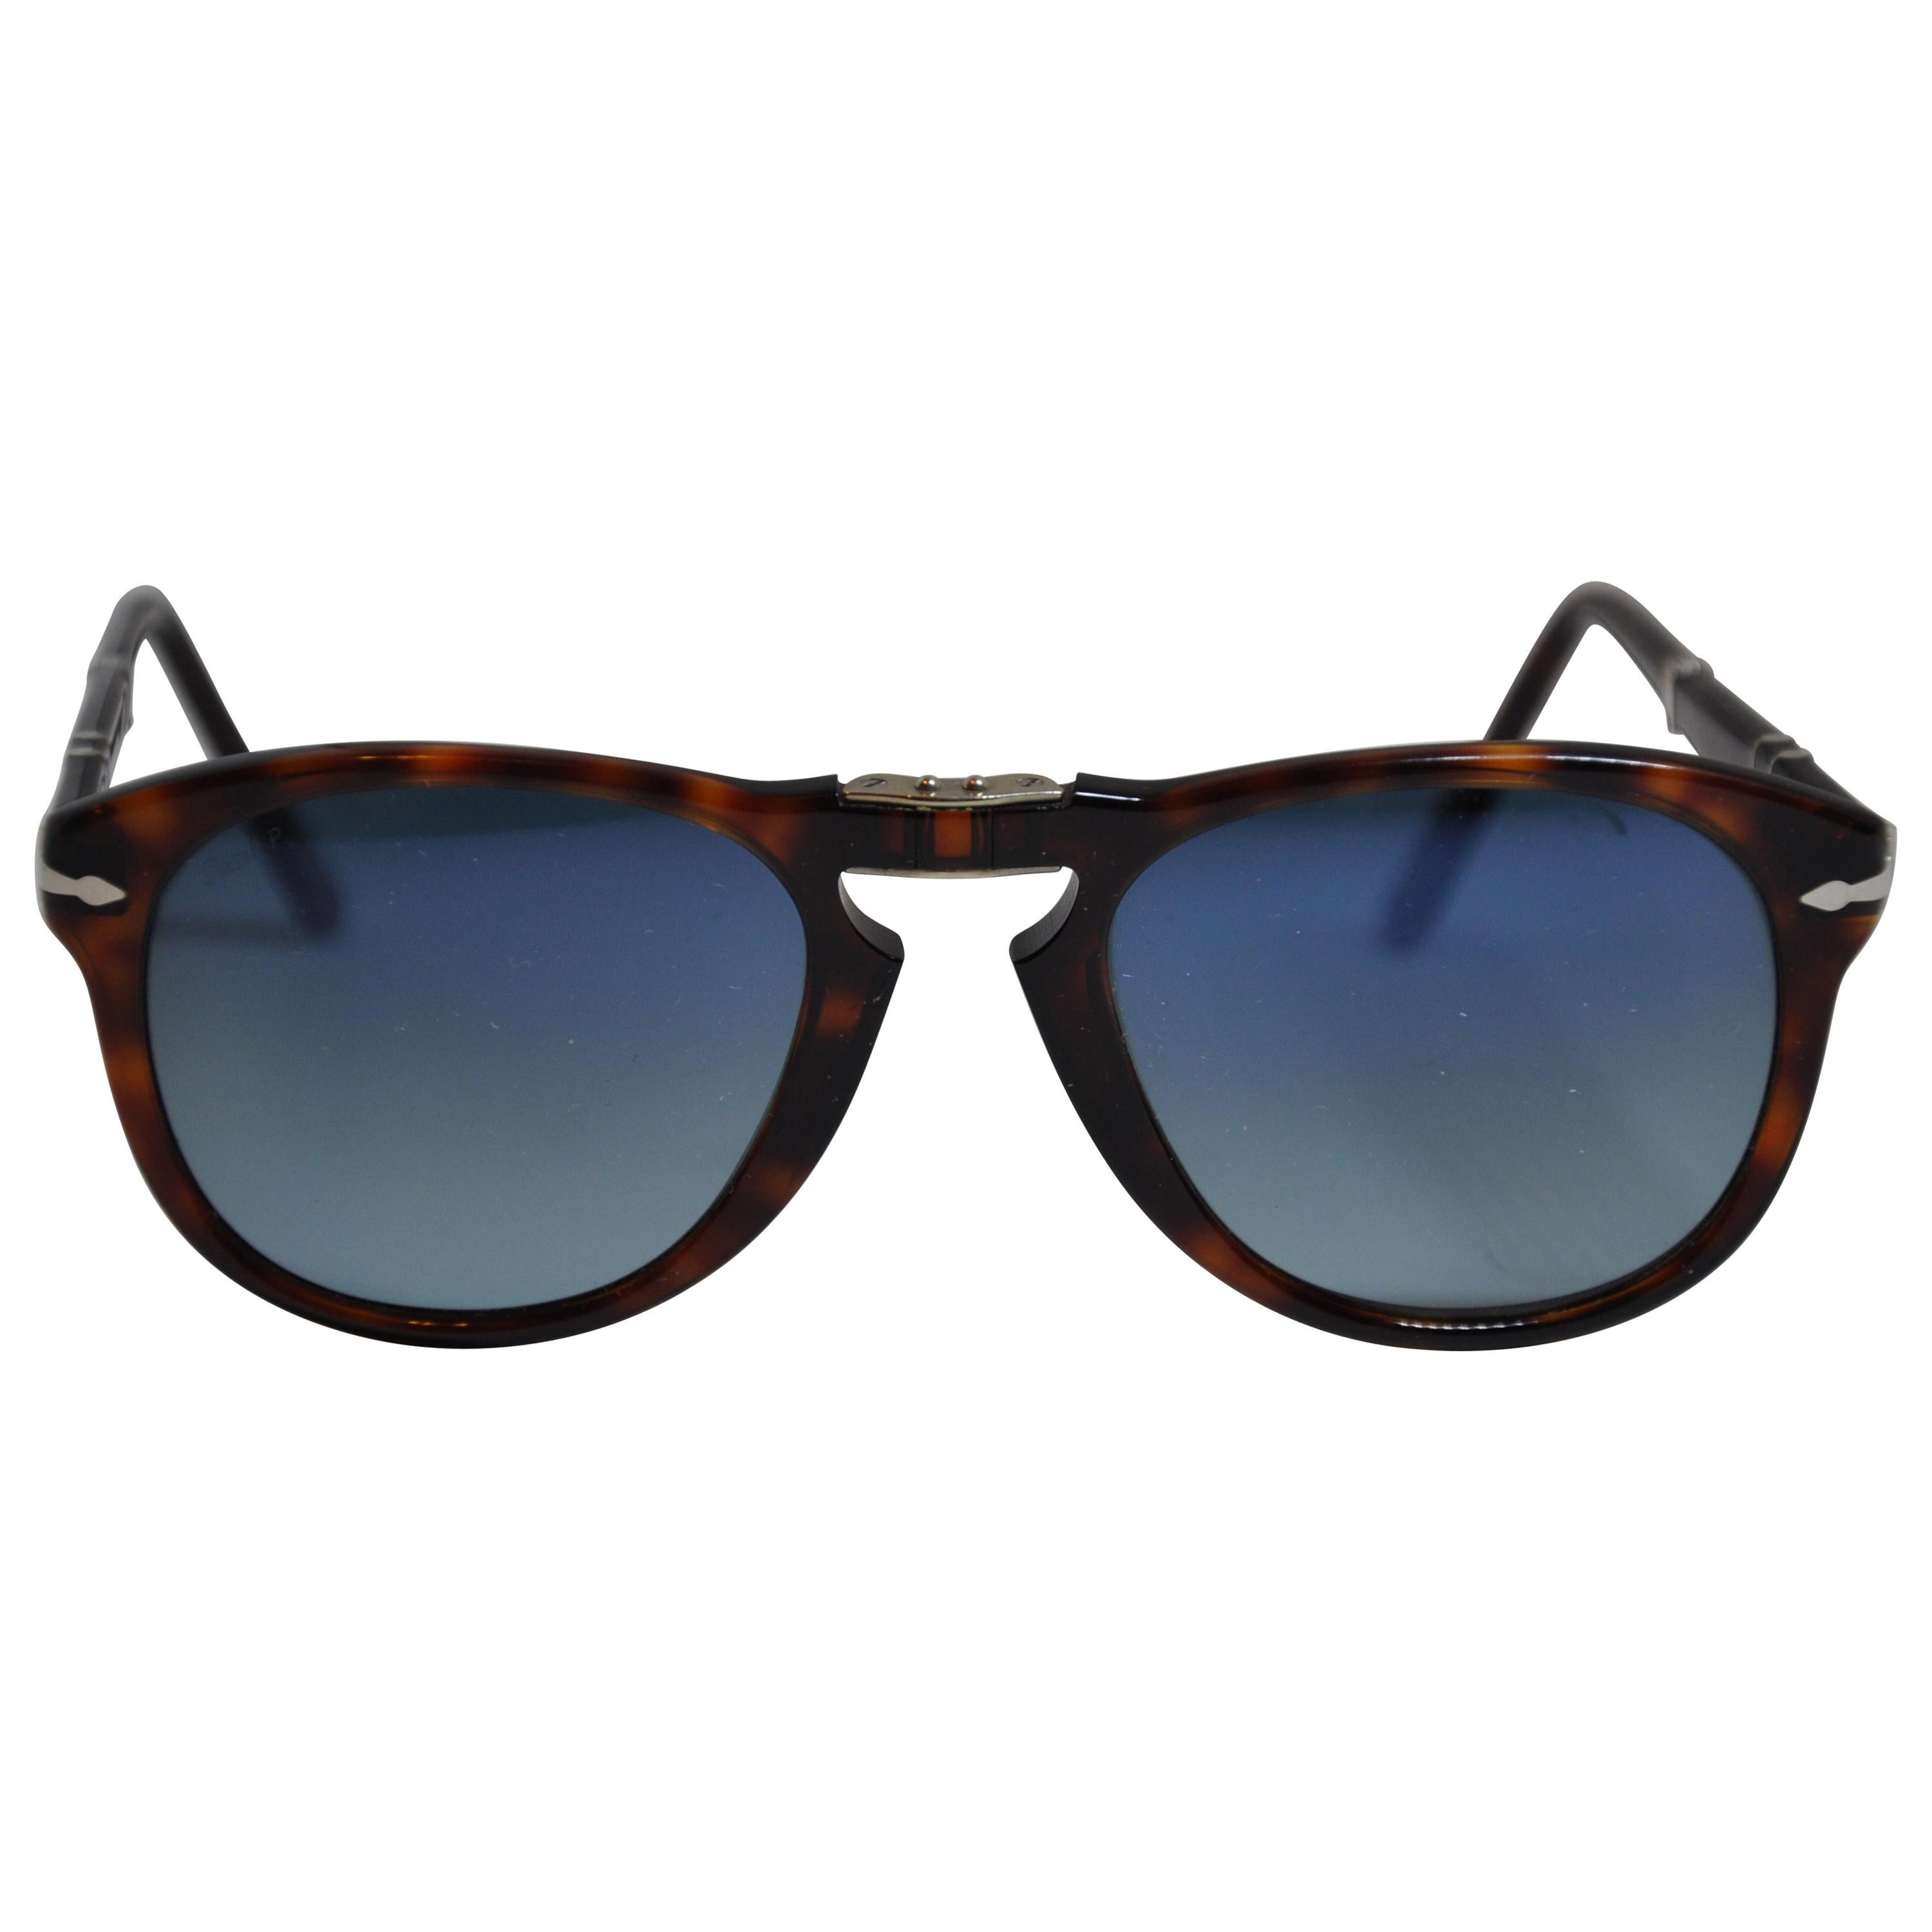 Persol Signature Detailed Tortoise Shell With Gold Hardware Folding Sunglasses